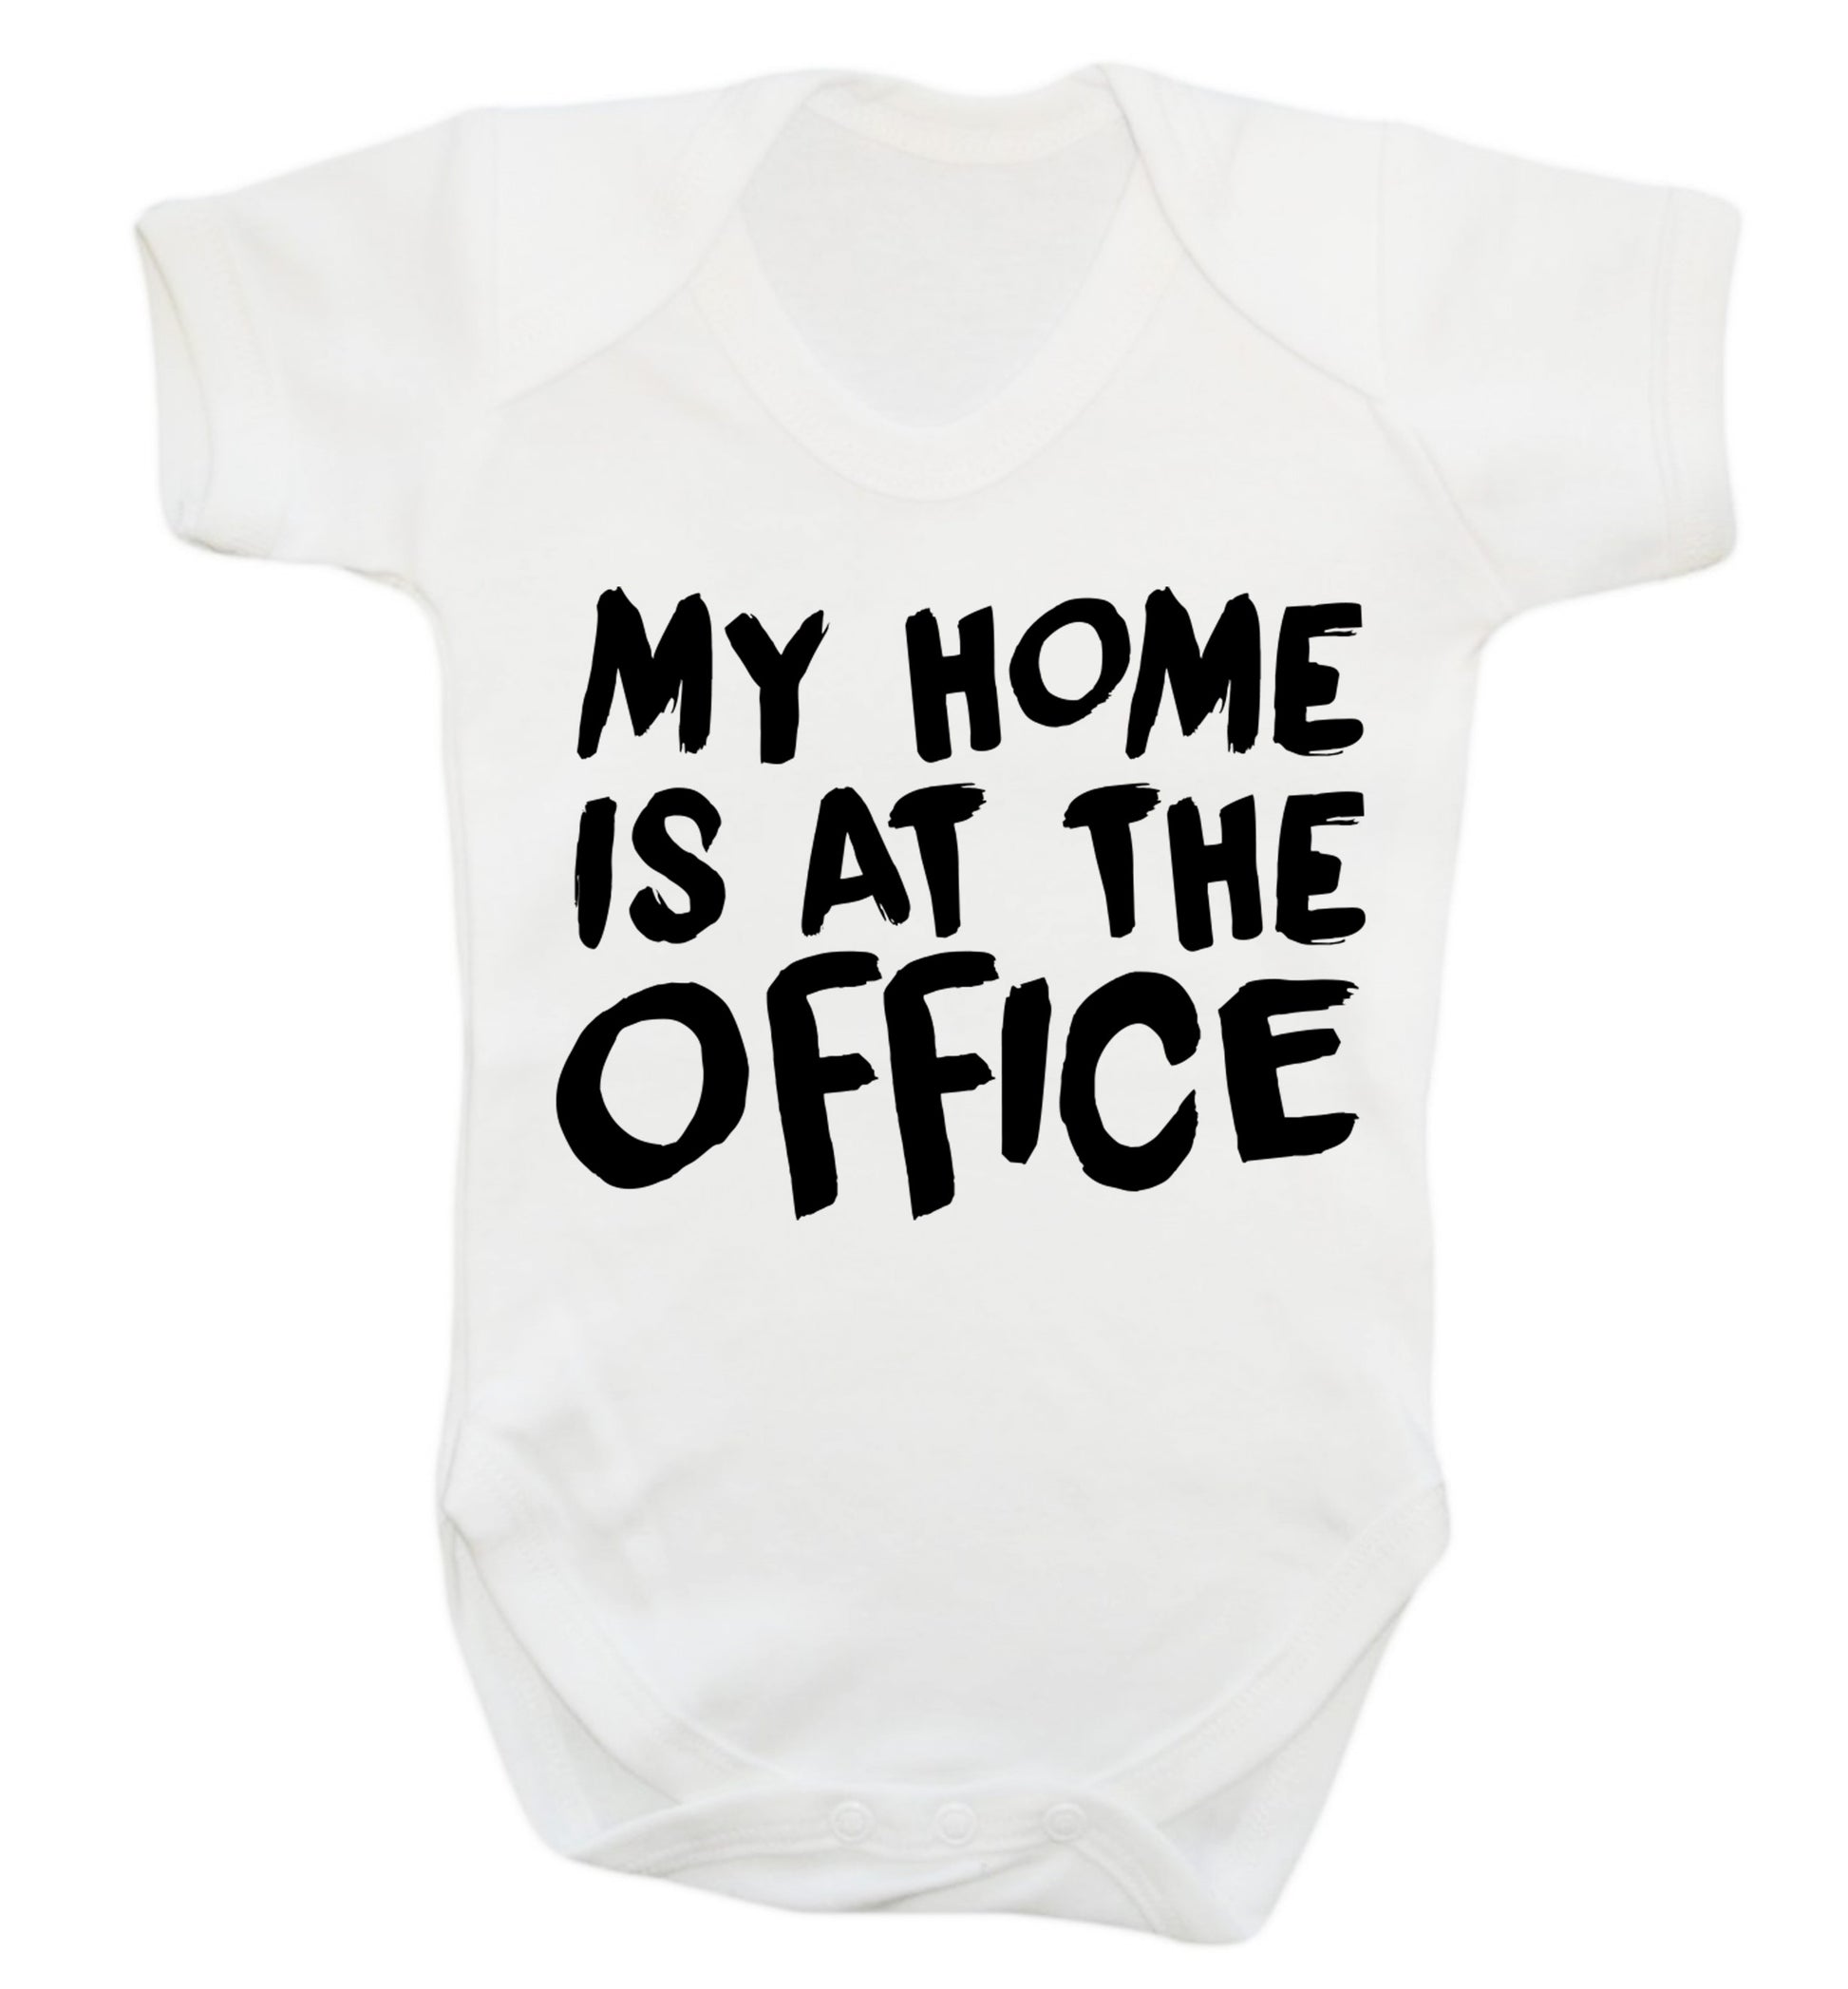 My home is at the office Baby Vest white 18-24 months